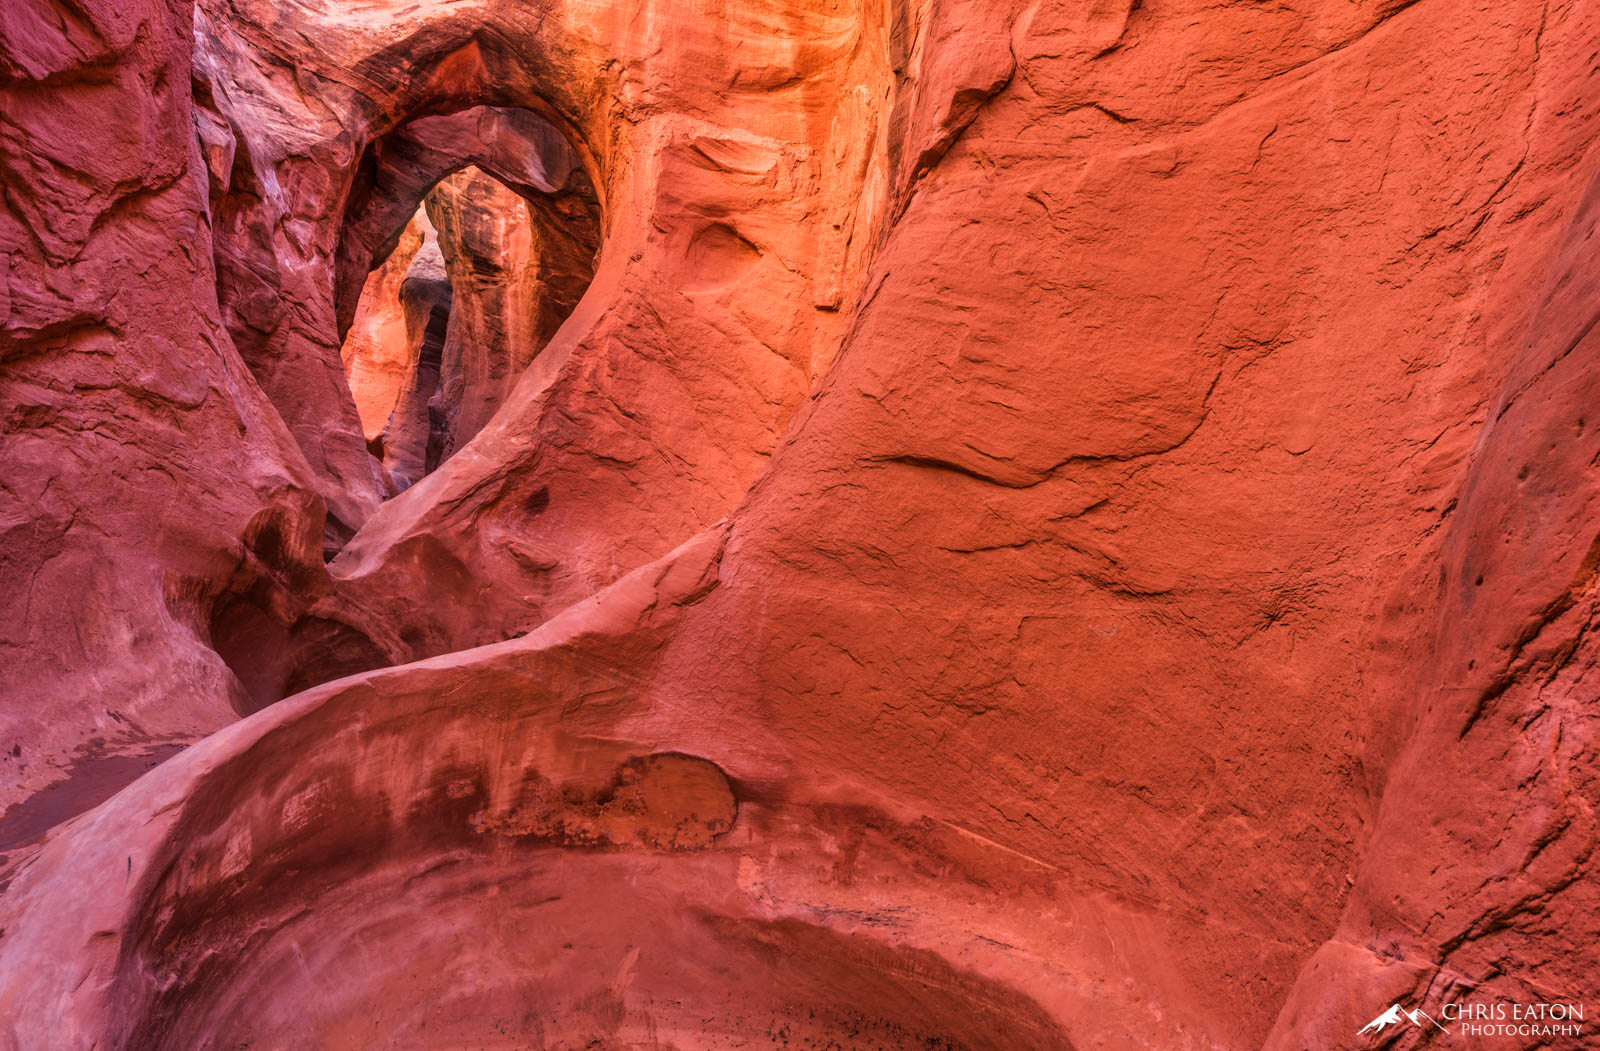 Peek-a-Boo Canyon, in the Escalante Canyons area of Grand Staircase-Escalante National Momunent, features a number of holes punched...